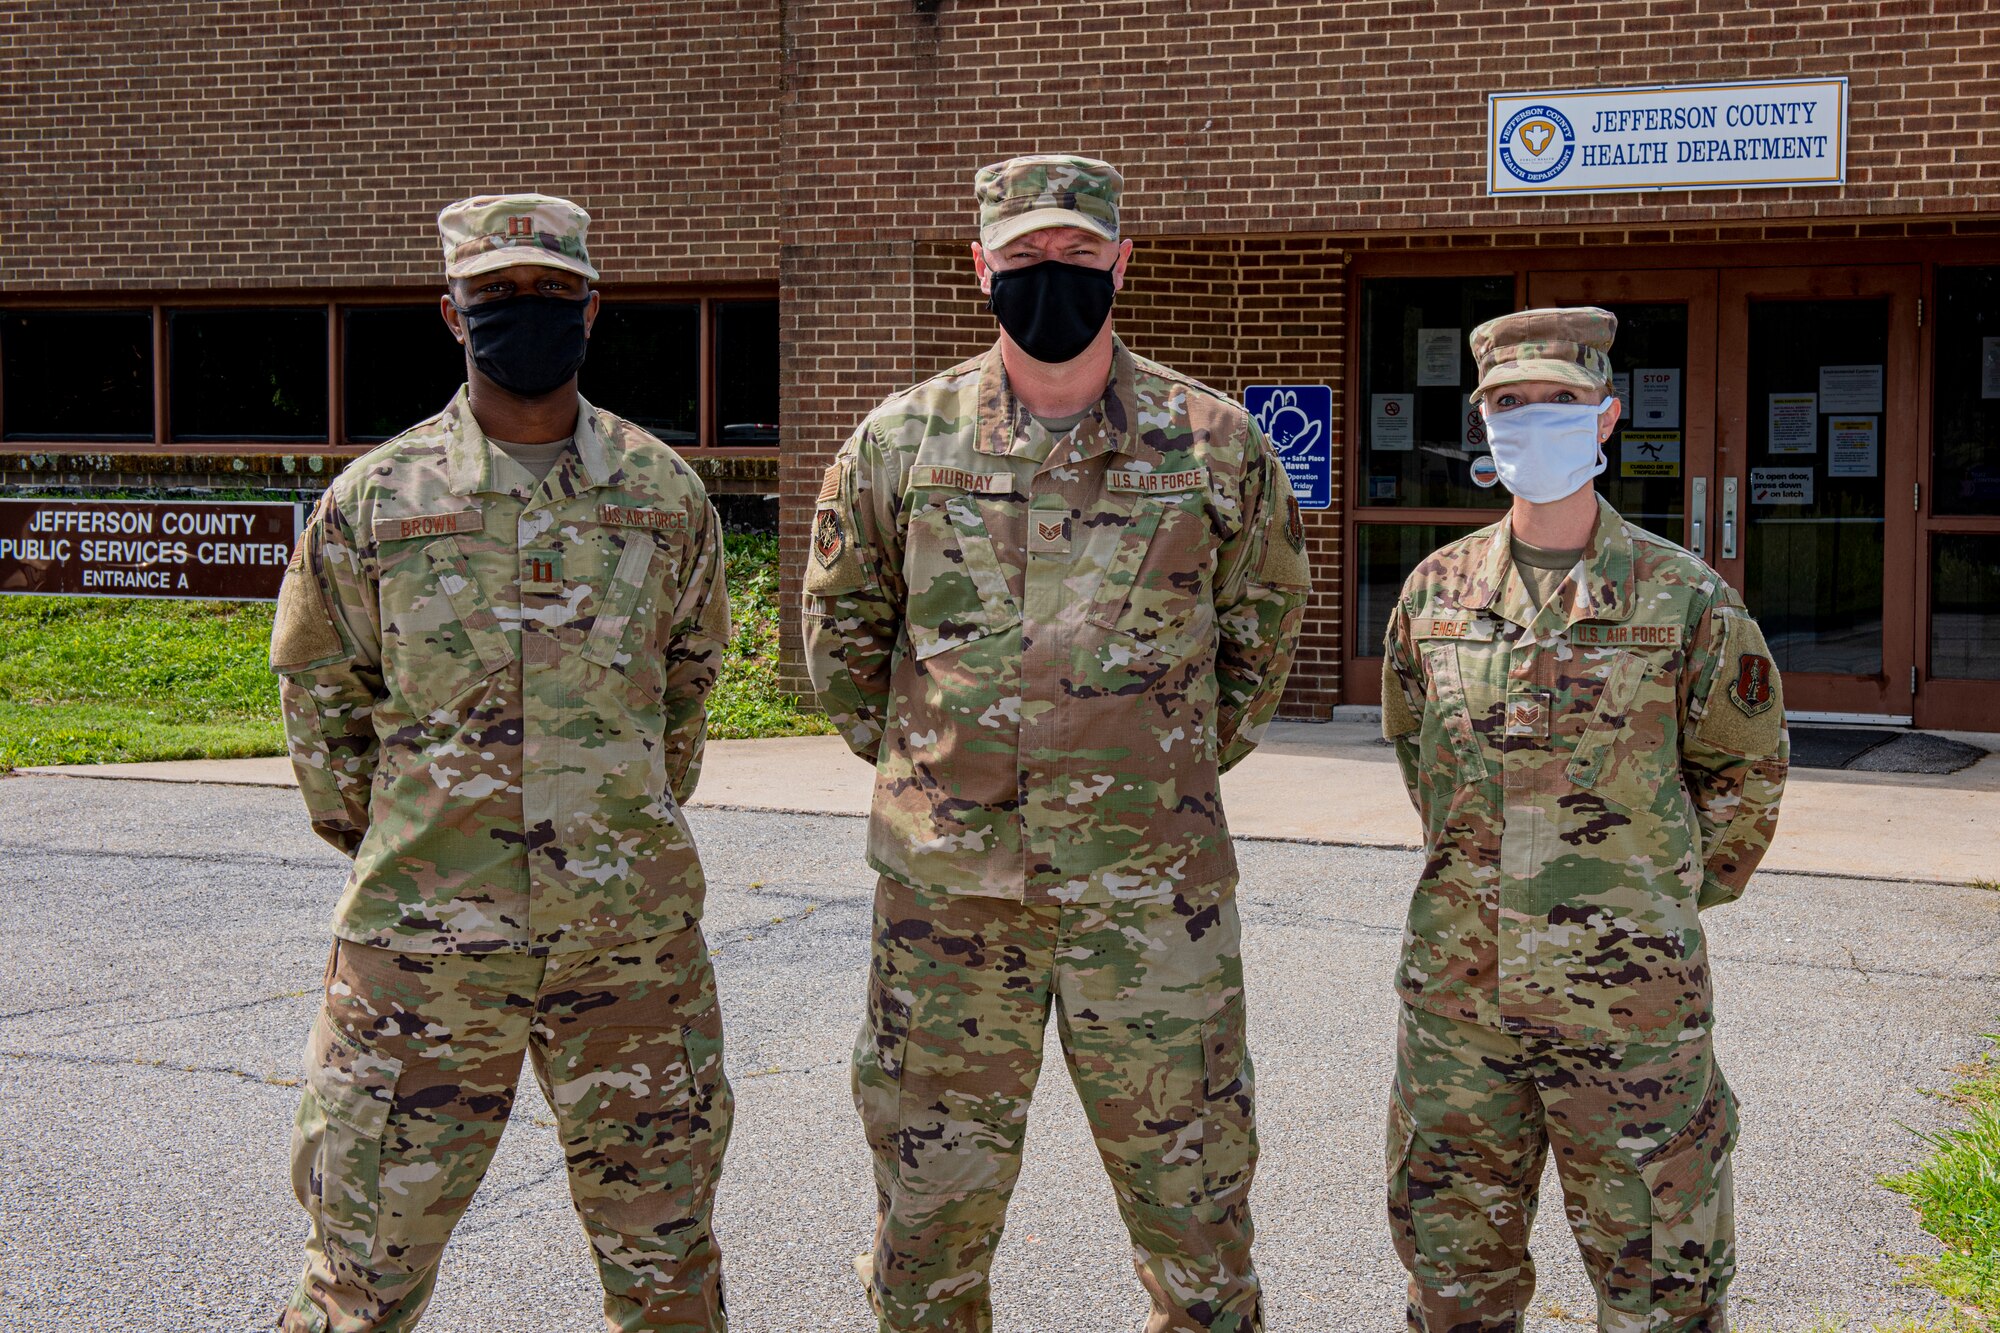 Three members of the 167th Airlift Wing are part of the local COVID-19 case investigation team at the Jefferson County Health Department, Martinsburg, W. Va., Aug. 20, 2020. From left to right, Capt. Rodney Brown, Staff Sgt. James Murray, and Staff Sgt. Erin Engle.  Airmen and civilian volunteers have teamed up to administer contact tracing for the local community. Data gathered from positive and negative tests, phone calls and text messaging are entered into a database where COVID-19 patients and their contacts are tracked.